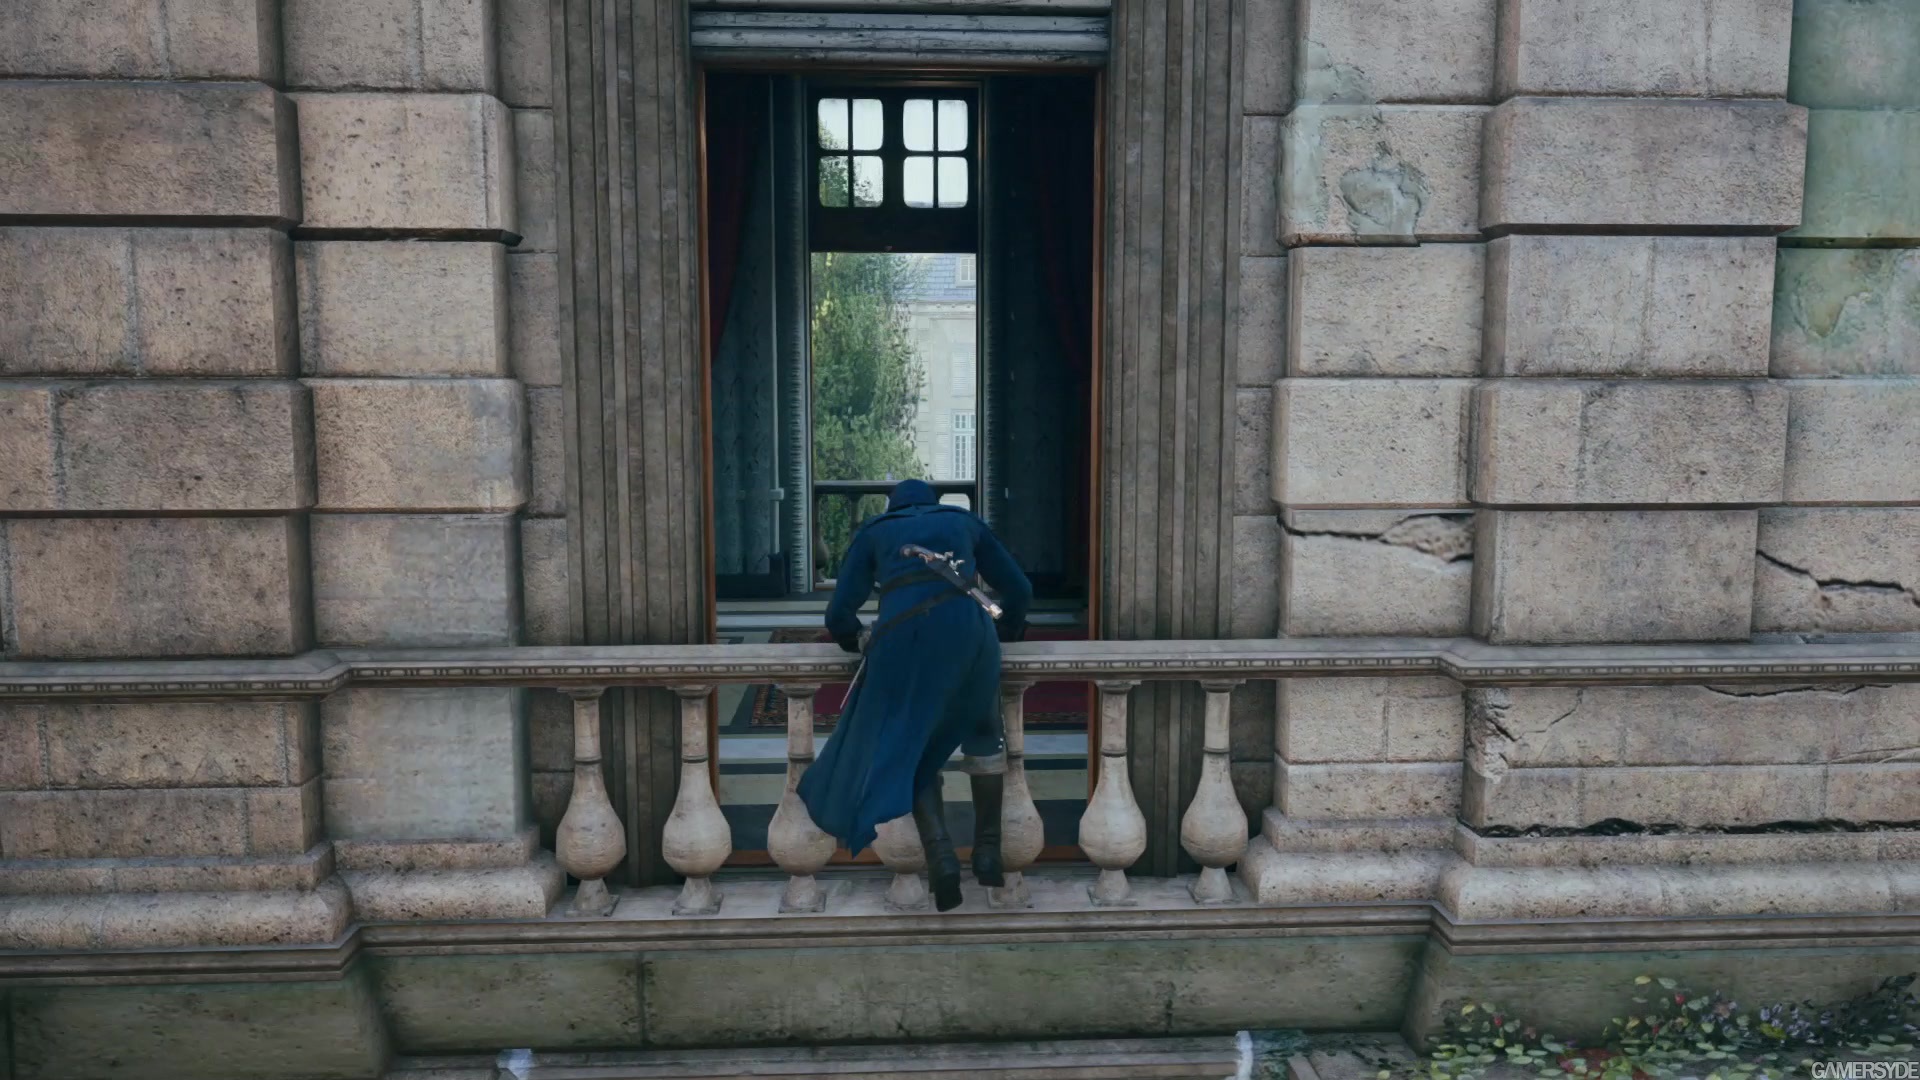 http://images.gamersyde.com/image_assassin_s_creed_unity-25265-2908_0011.jpg